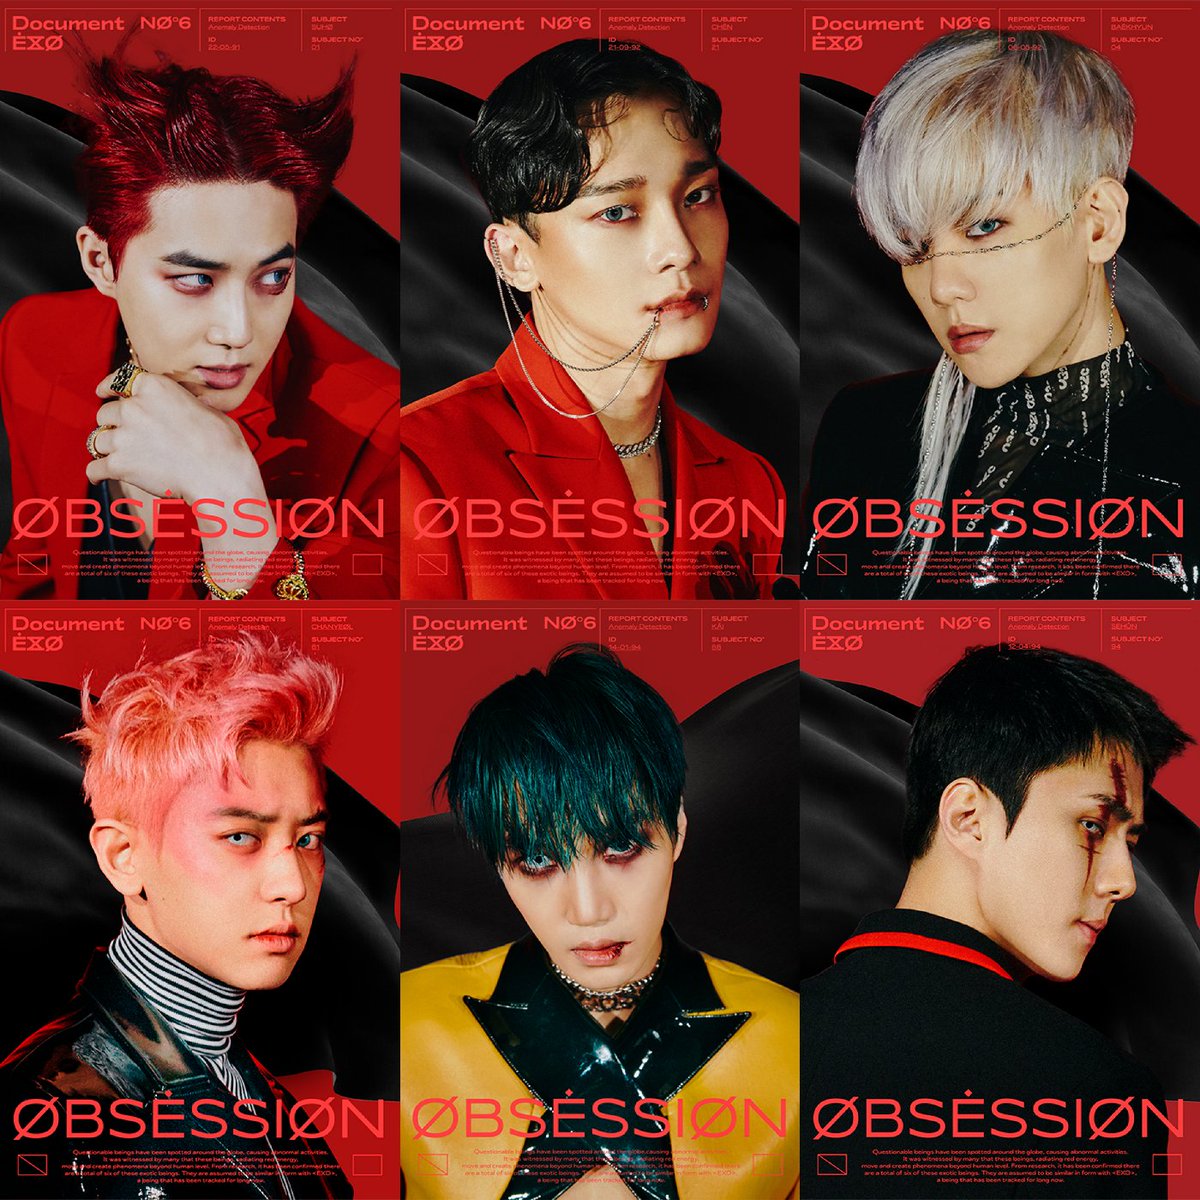 'OBSESSION' Comeback Teasers!! This album is definitely going to be intense!! Let's give our full effort to support them! Can't wait!!!!

#OBSESSION #EXO @weareoneEXO